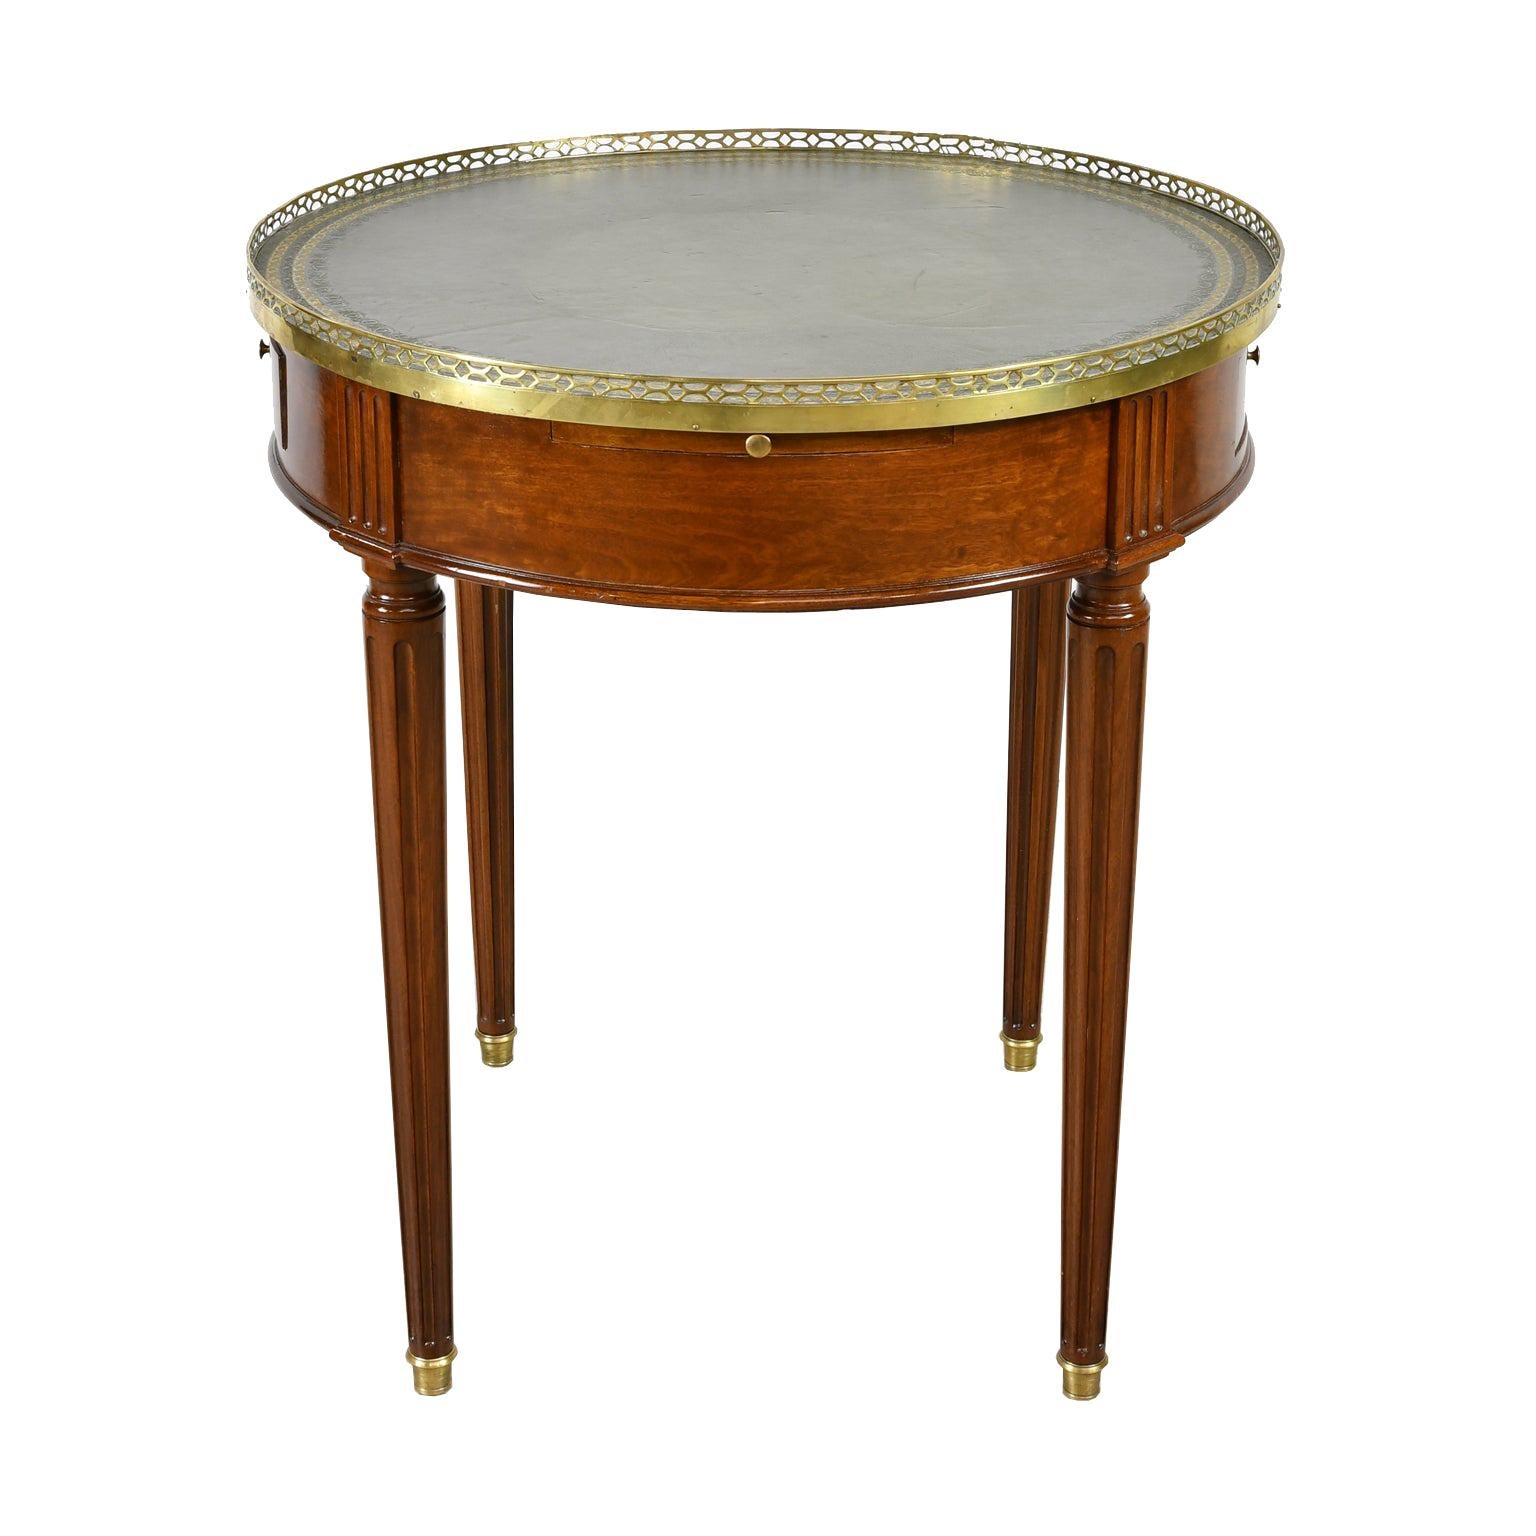 Round Bouillotte Table in Mahogany with Green Tooled Leather Top, France